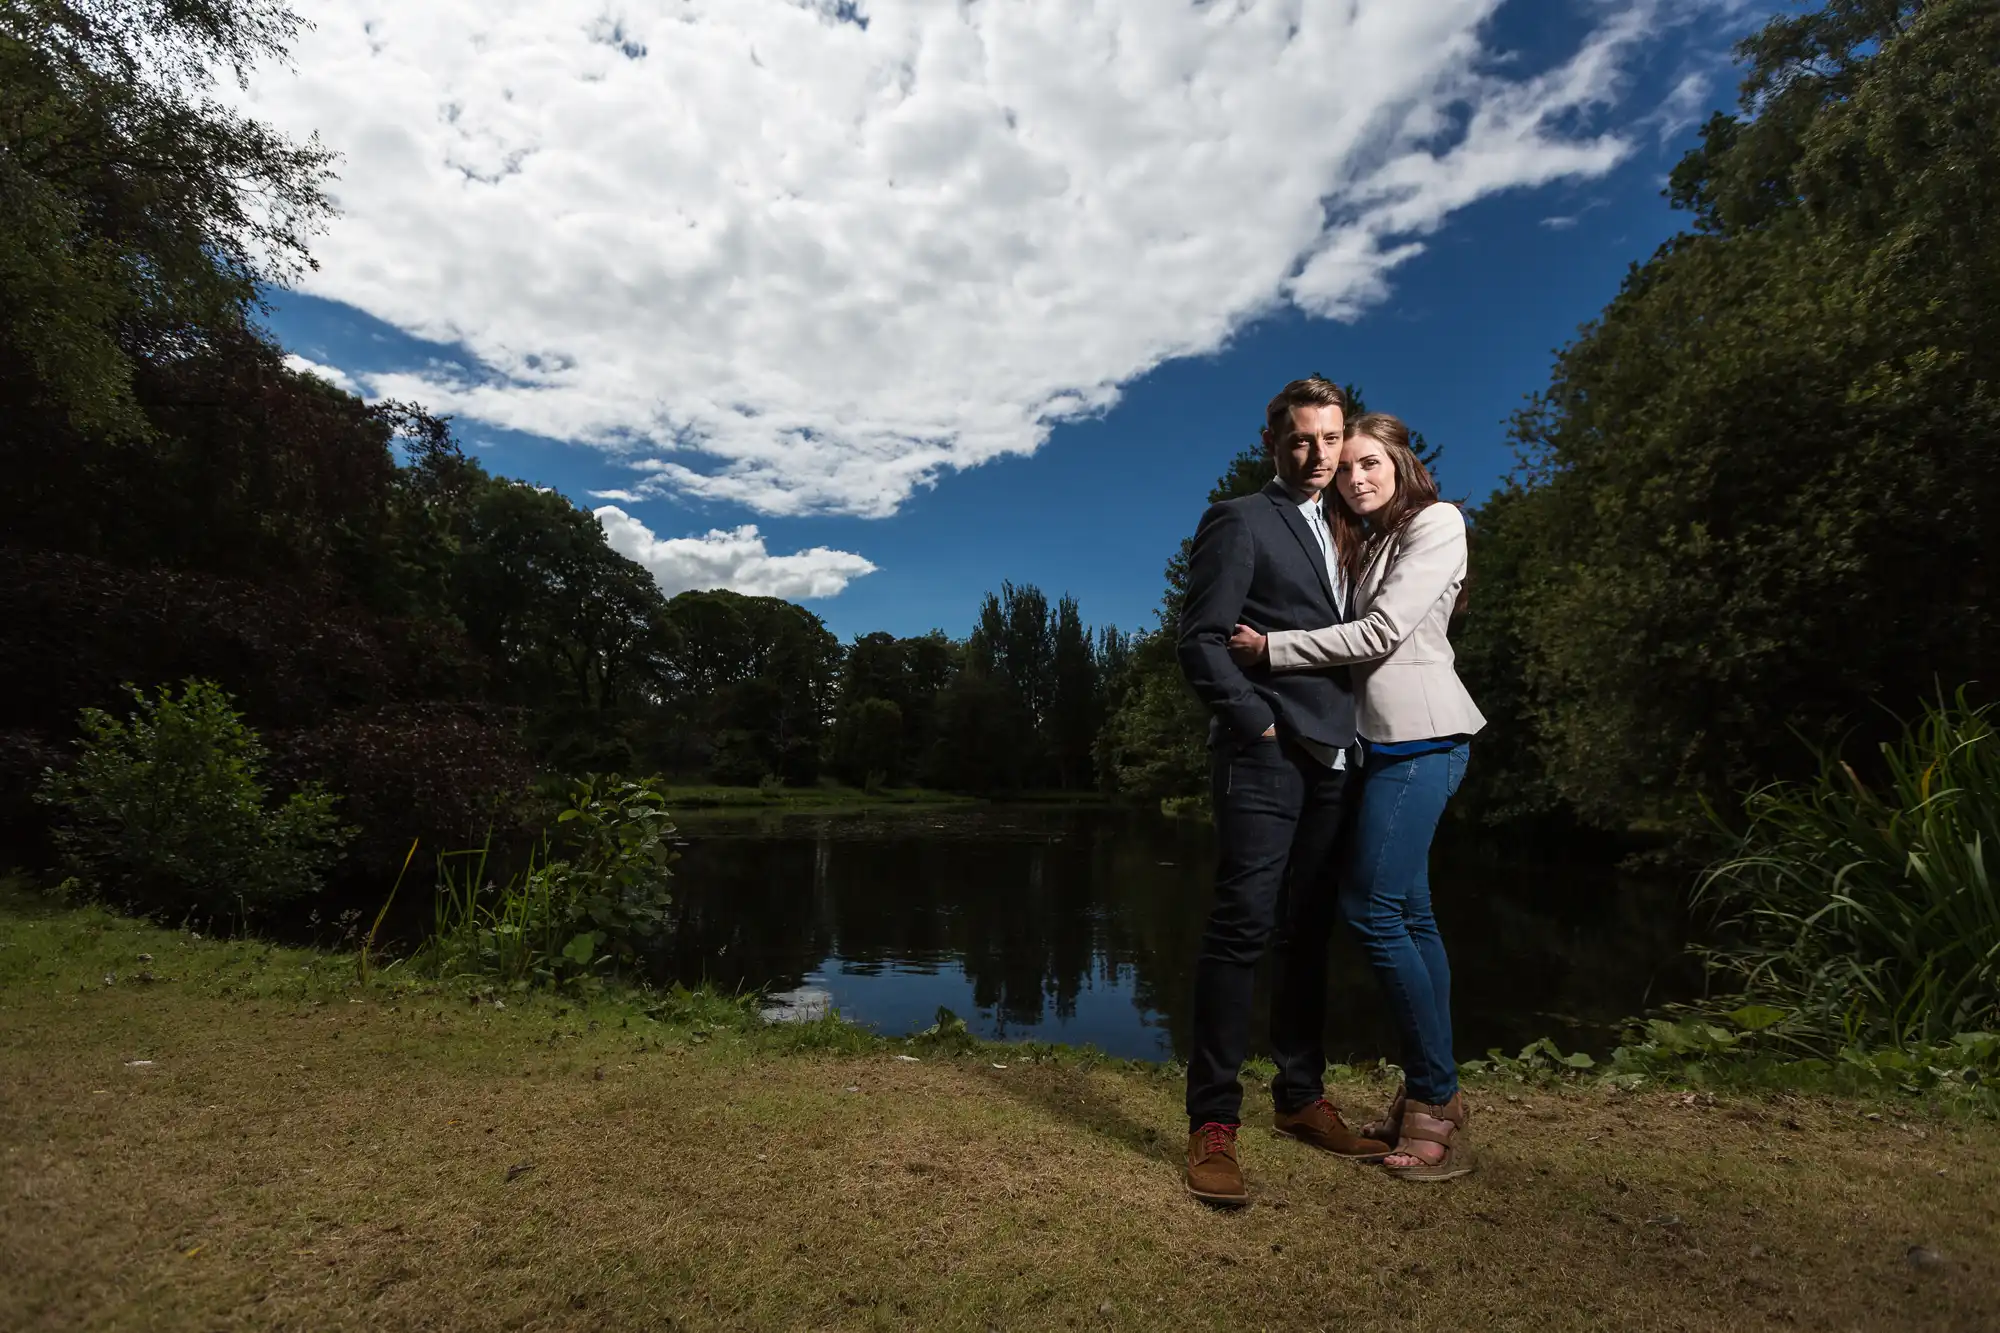 A couple embracing by a serene pond under a cloudy sky in a lush park.